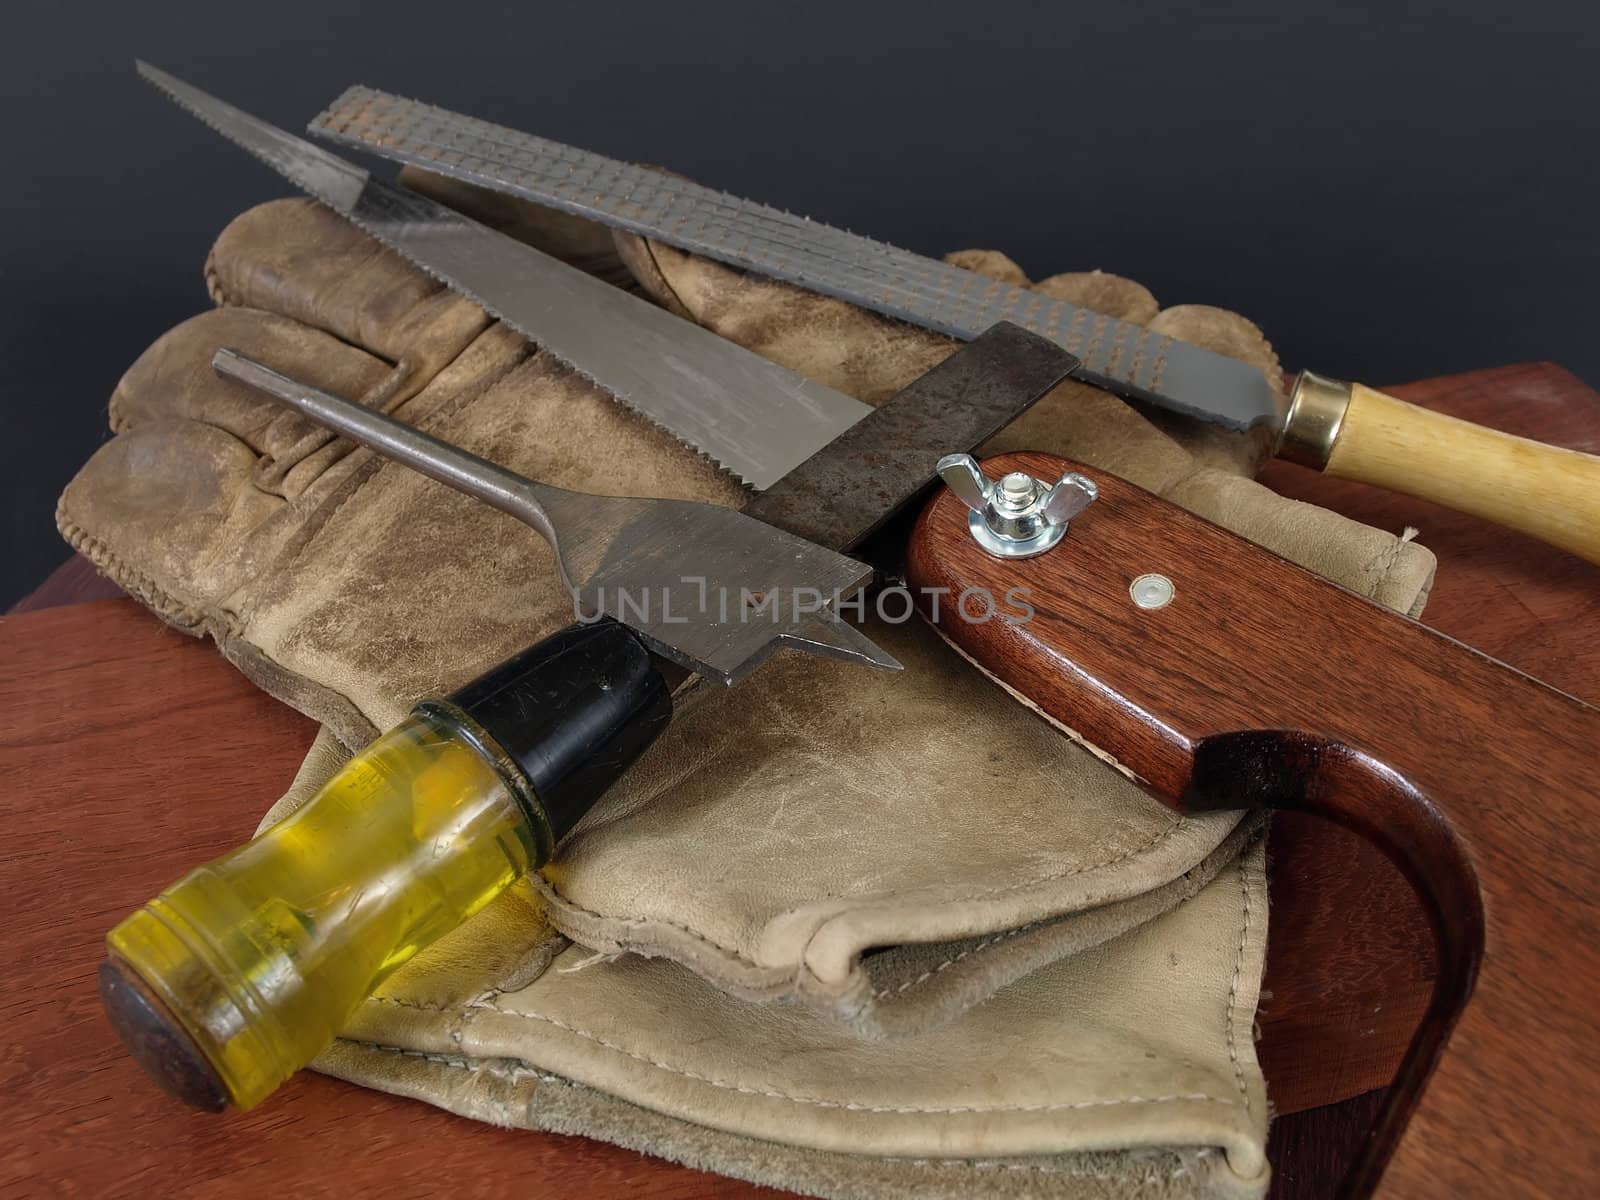 Small hand tools for woodworking, with a pair of leather gloves.